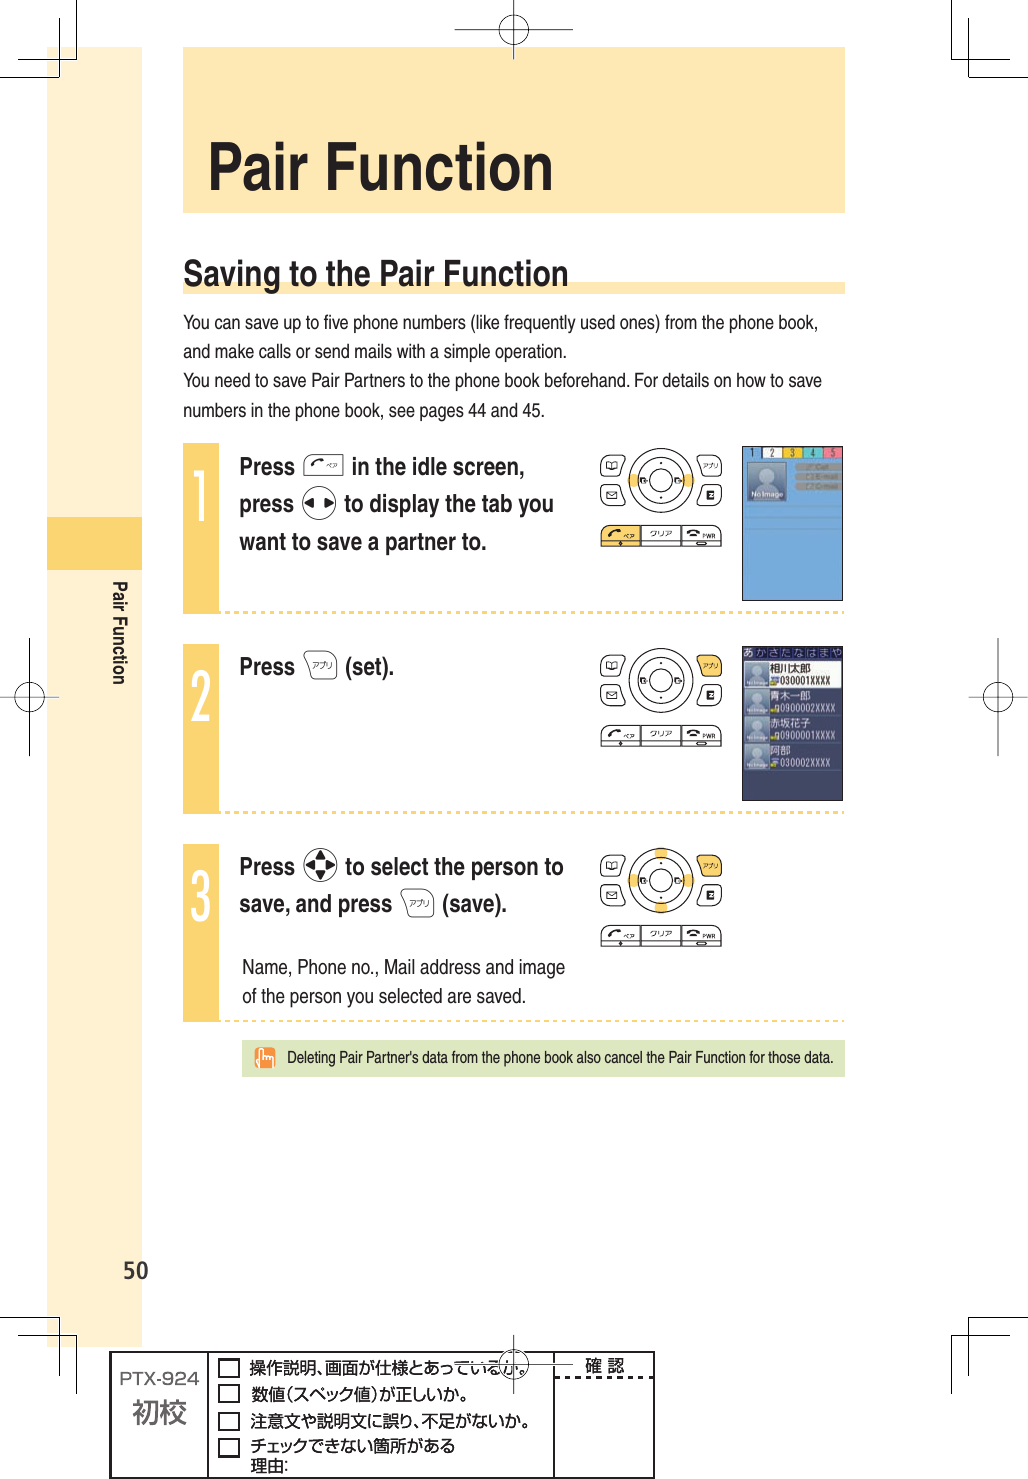 50Pair Function Pair  Function Saving to the Pair FunctionYou can save up to ﬁ ve phone numbers (like frequently used ones) from the phone book, and make calls or send mails with a simple operation.You need to save Pair Partners to the phone book beforehand. For details on how to save numbers in the phone book, see pages 44 and 45. 1Press T in the idle screen, press s to display the tab you want to save a partner to.2Press A (set).3Press o to select the person to save, and press A (save).Name, Phone no., Mail address and image of the person you selected are saved. Deleting Pair Partner&apos;s data from the phone book also cancel the Pair Function for those data.